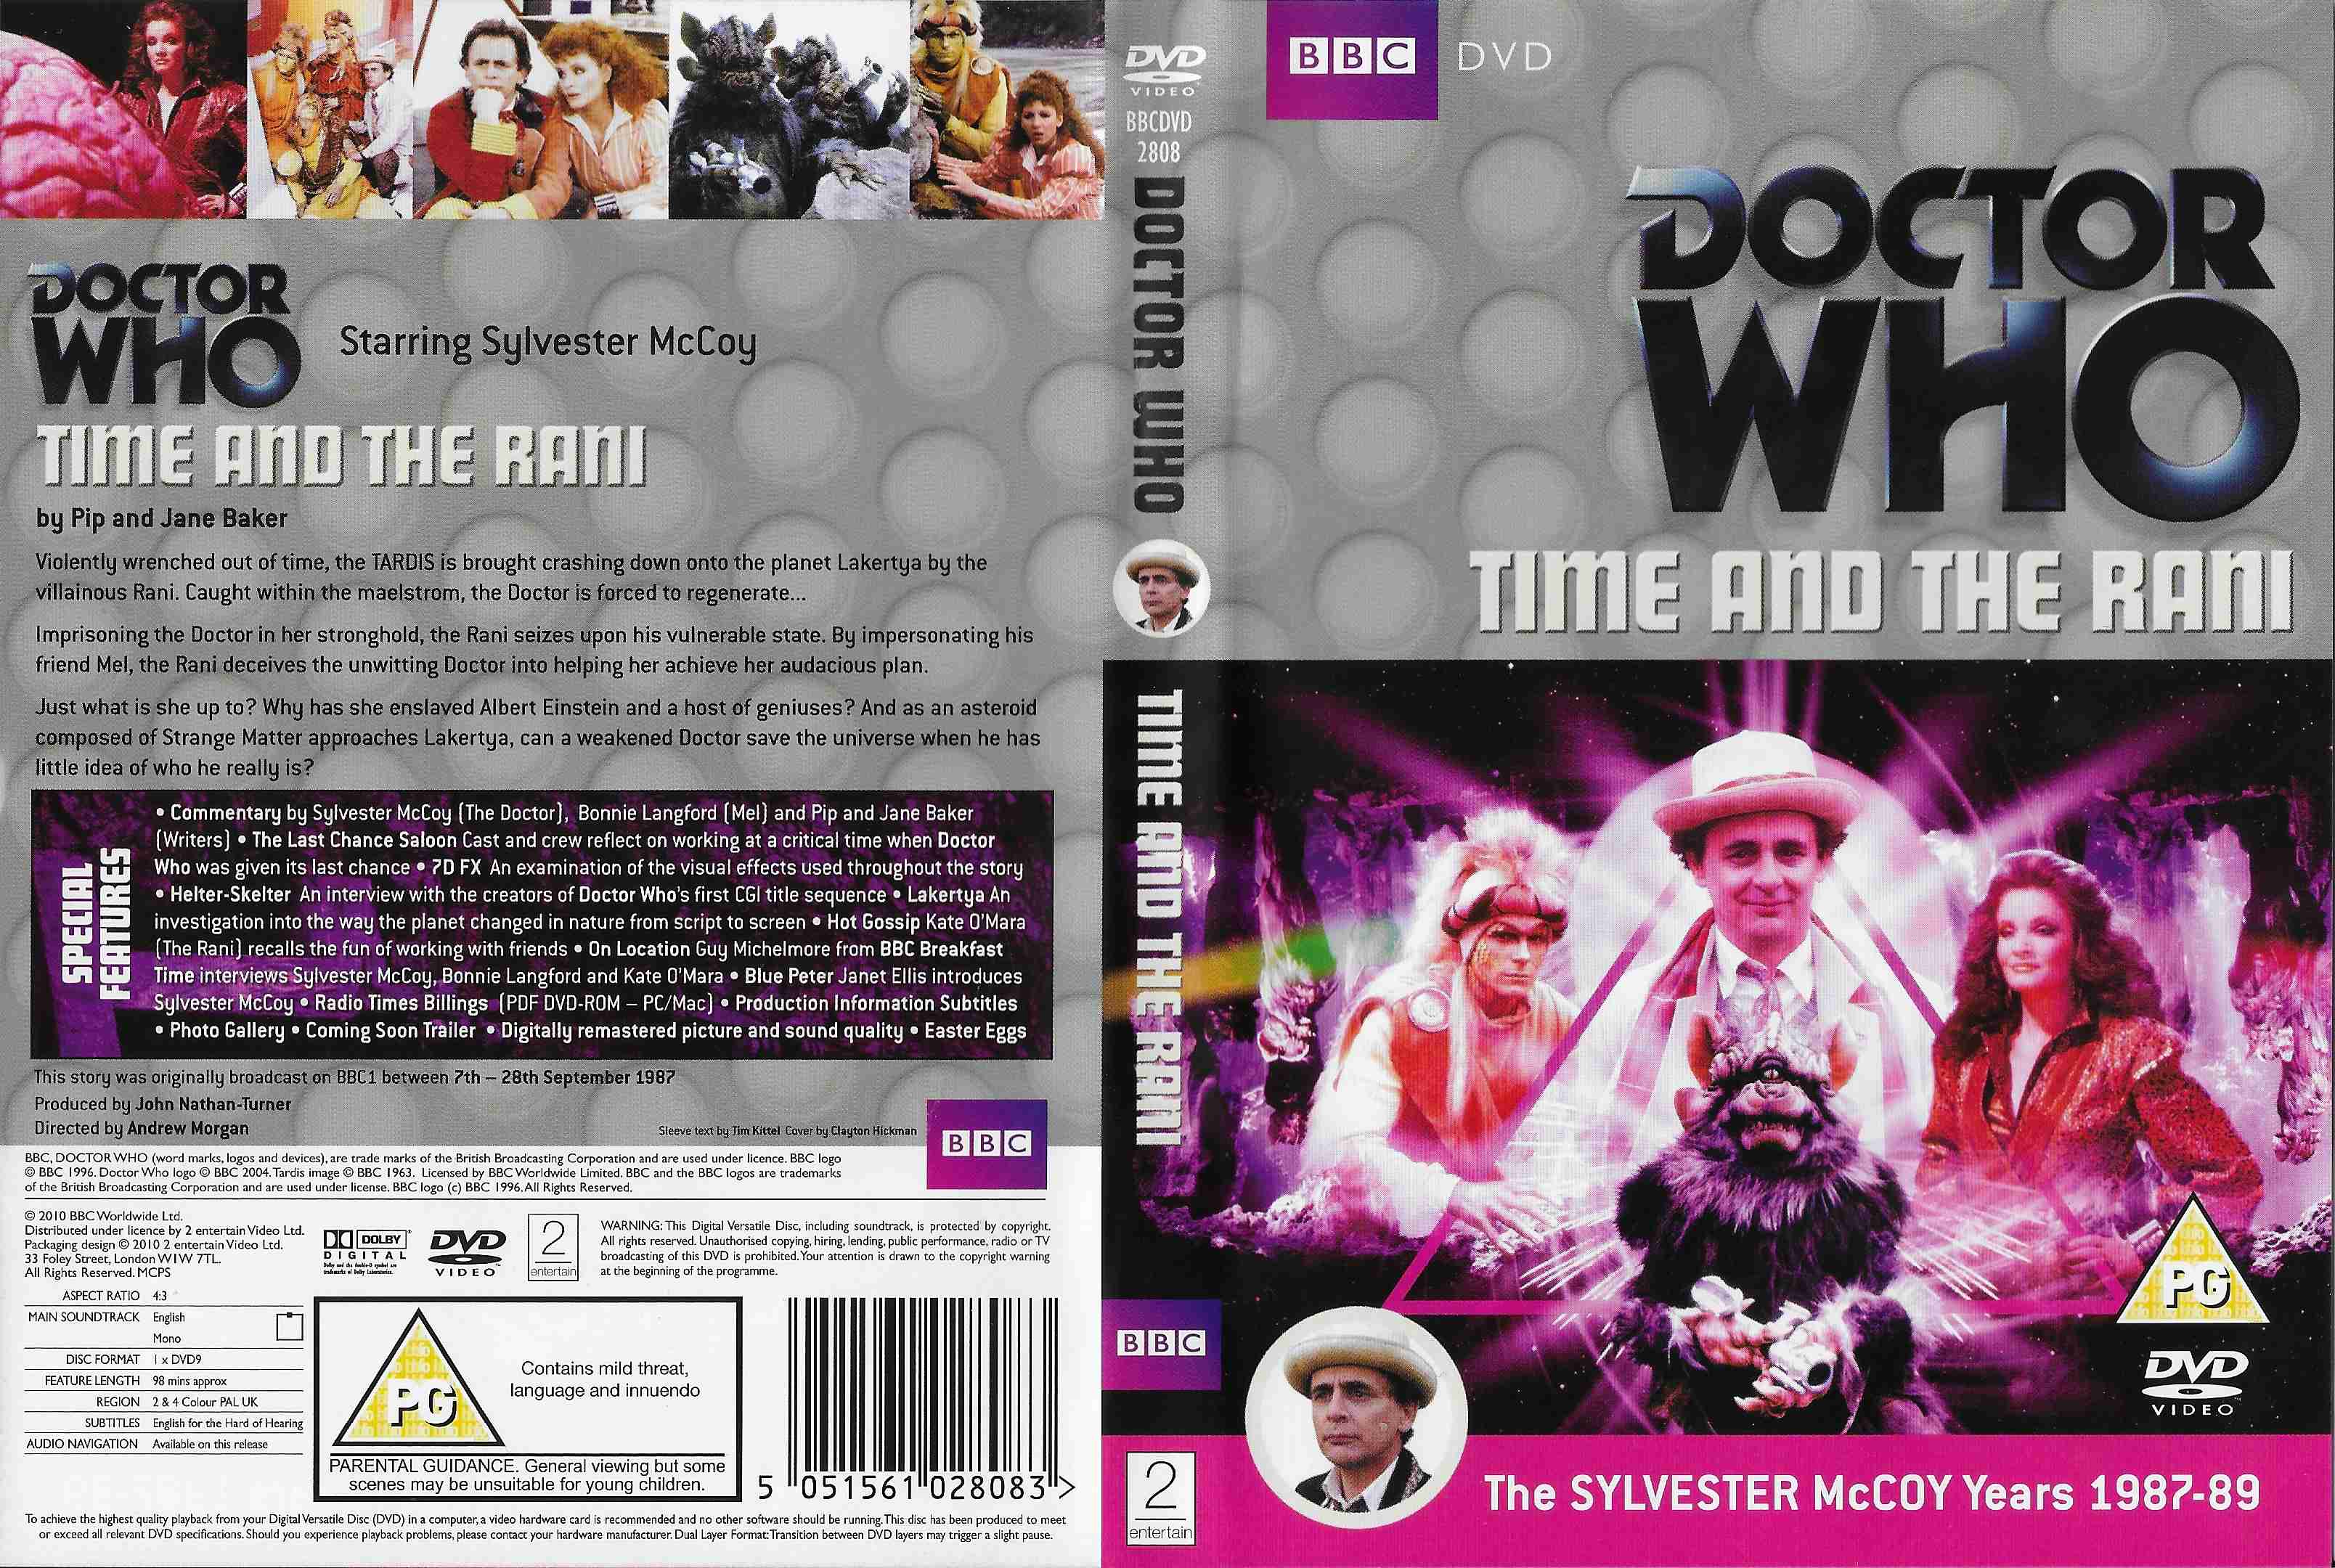 Picture of BBCDVD 2808 Doctor Who - Time and the Rani by artist Pip and Jane Baker from the BBC records and Tapes library